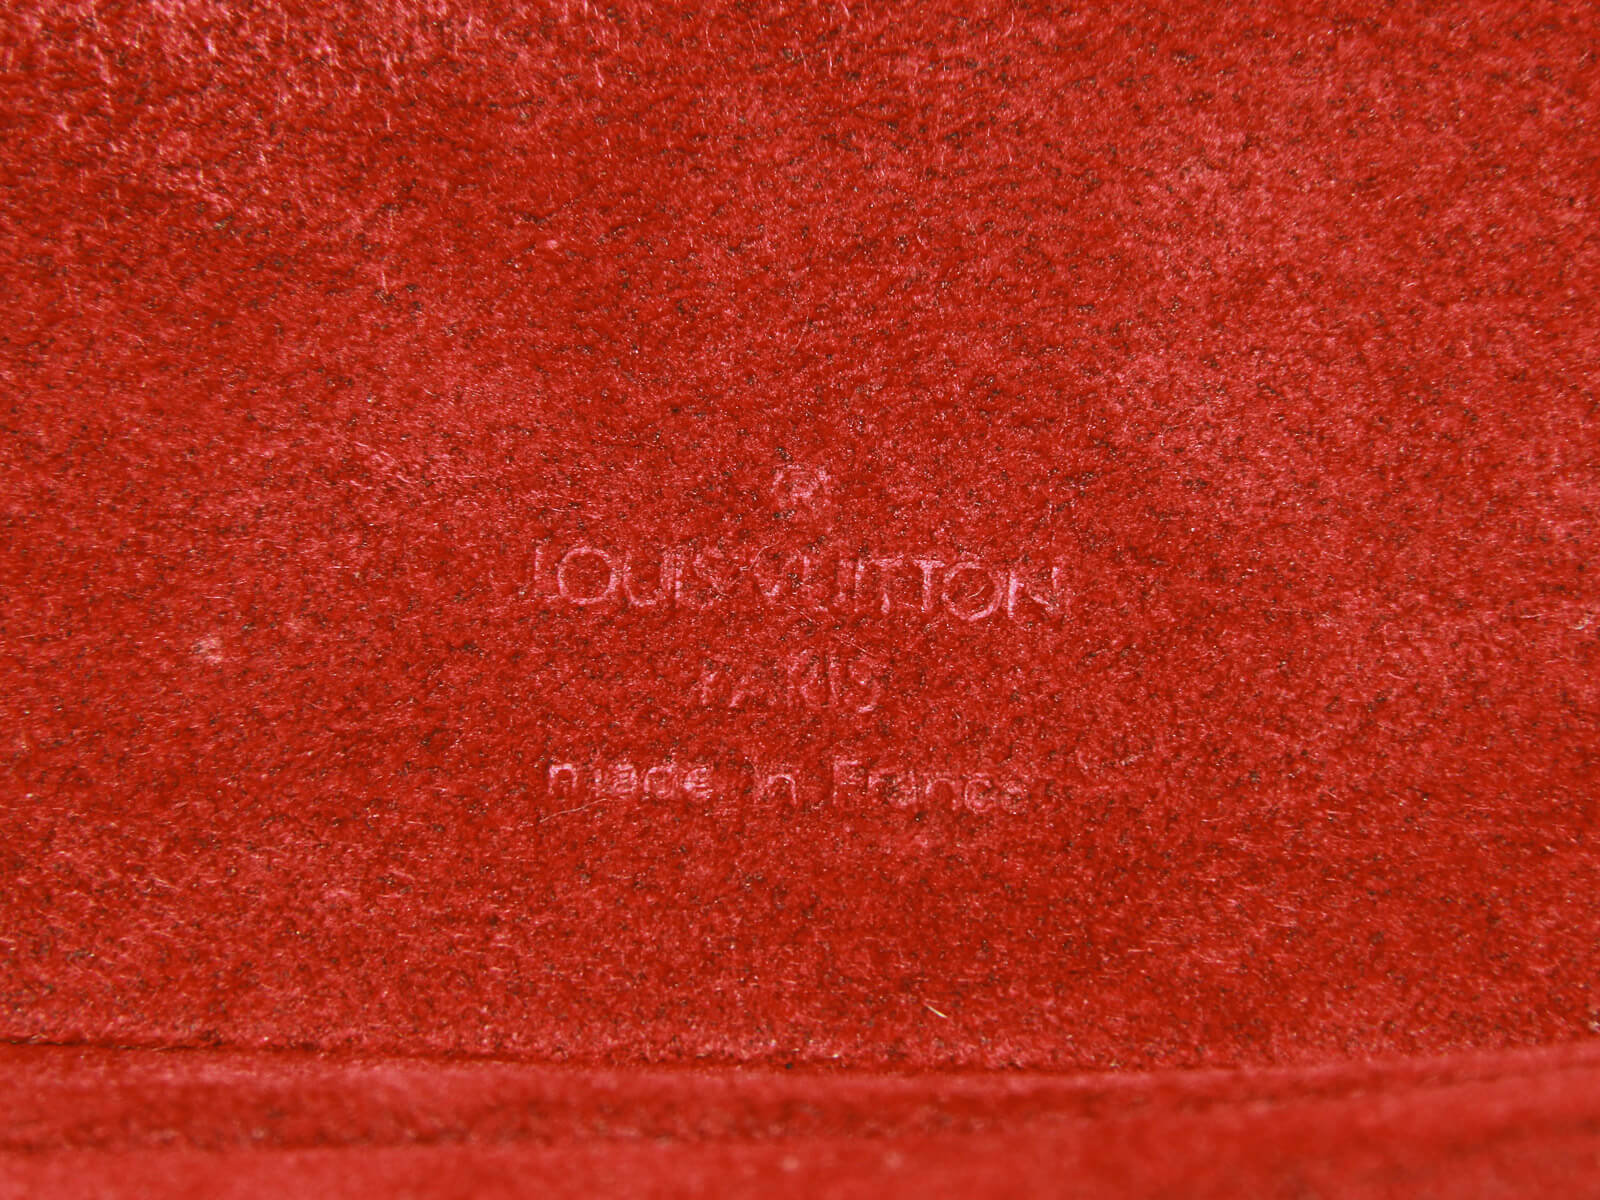 Buy Free Shipping [Used] LOUIS VUITTON Cannes Vanity Bag Handbag Epi Noir  Black M48032 from Japan - Buy authentic Plus exclusive items from Japan